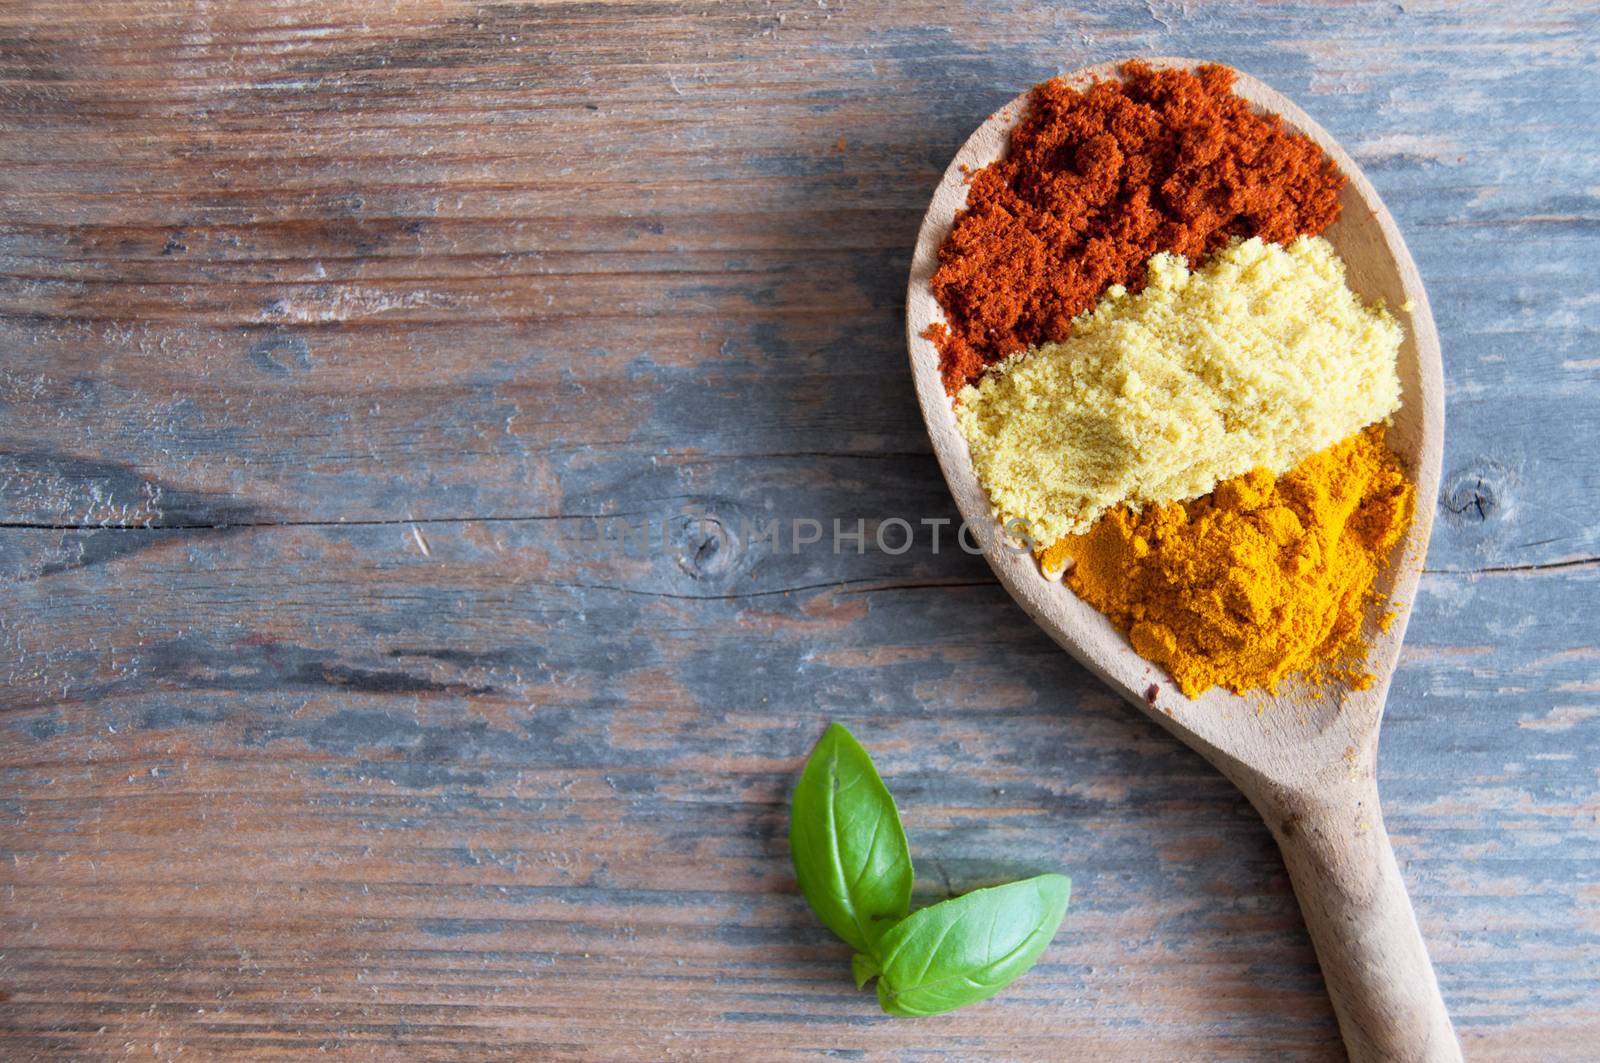 Mix of spices in a wooden spoon over a wooden background